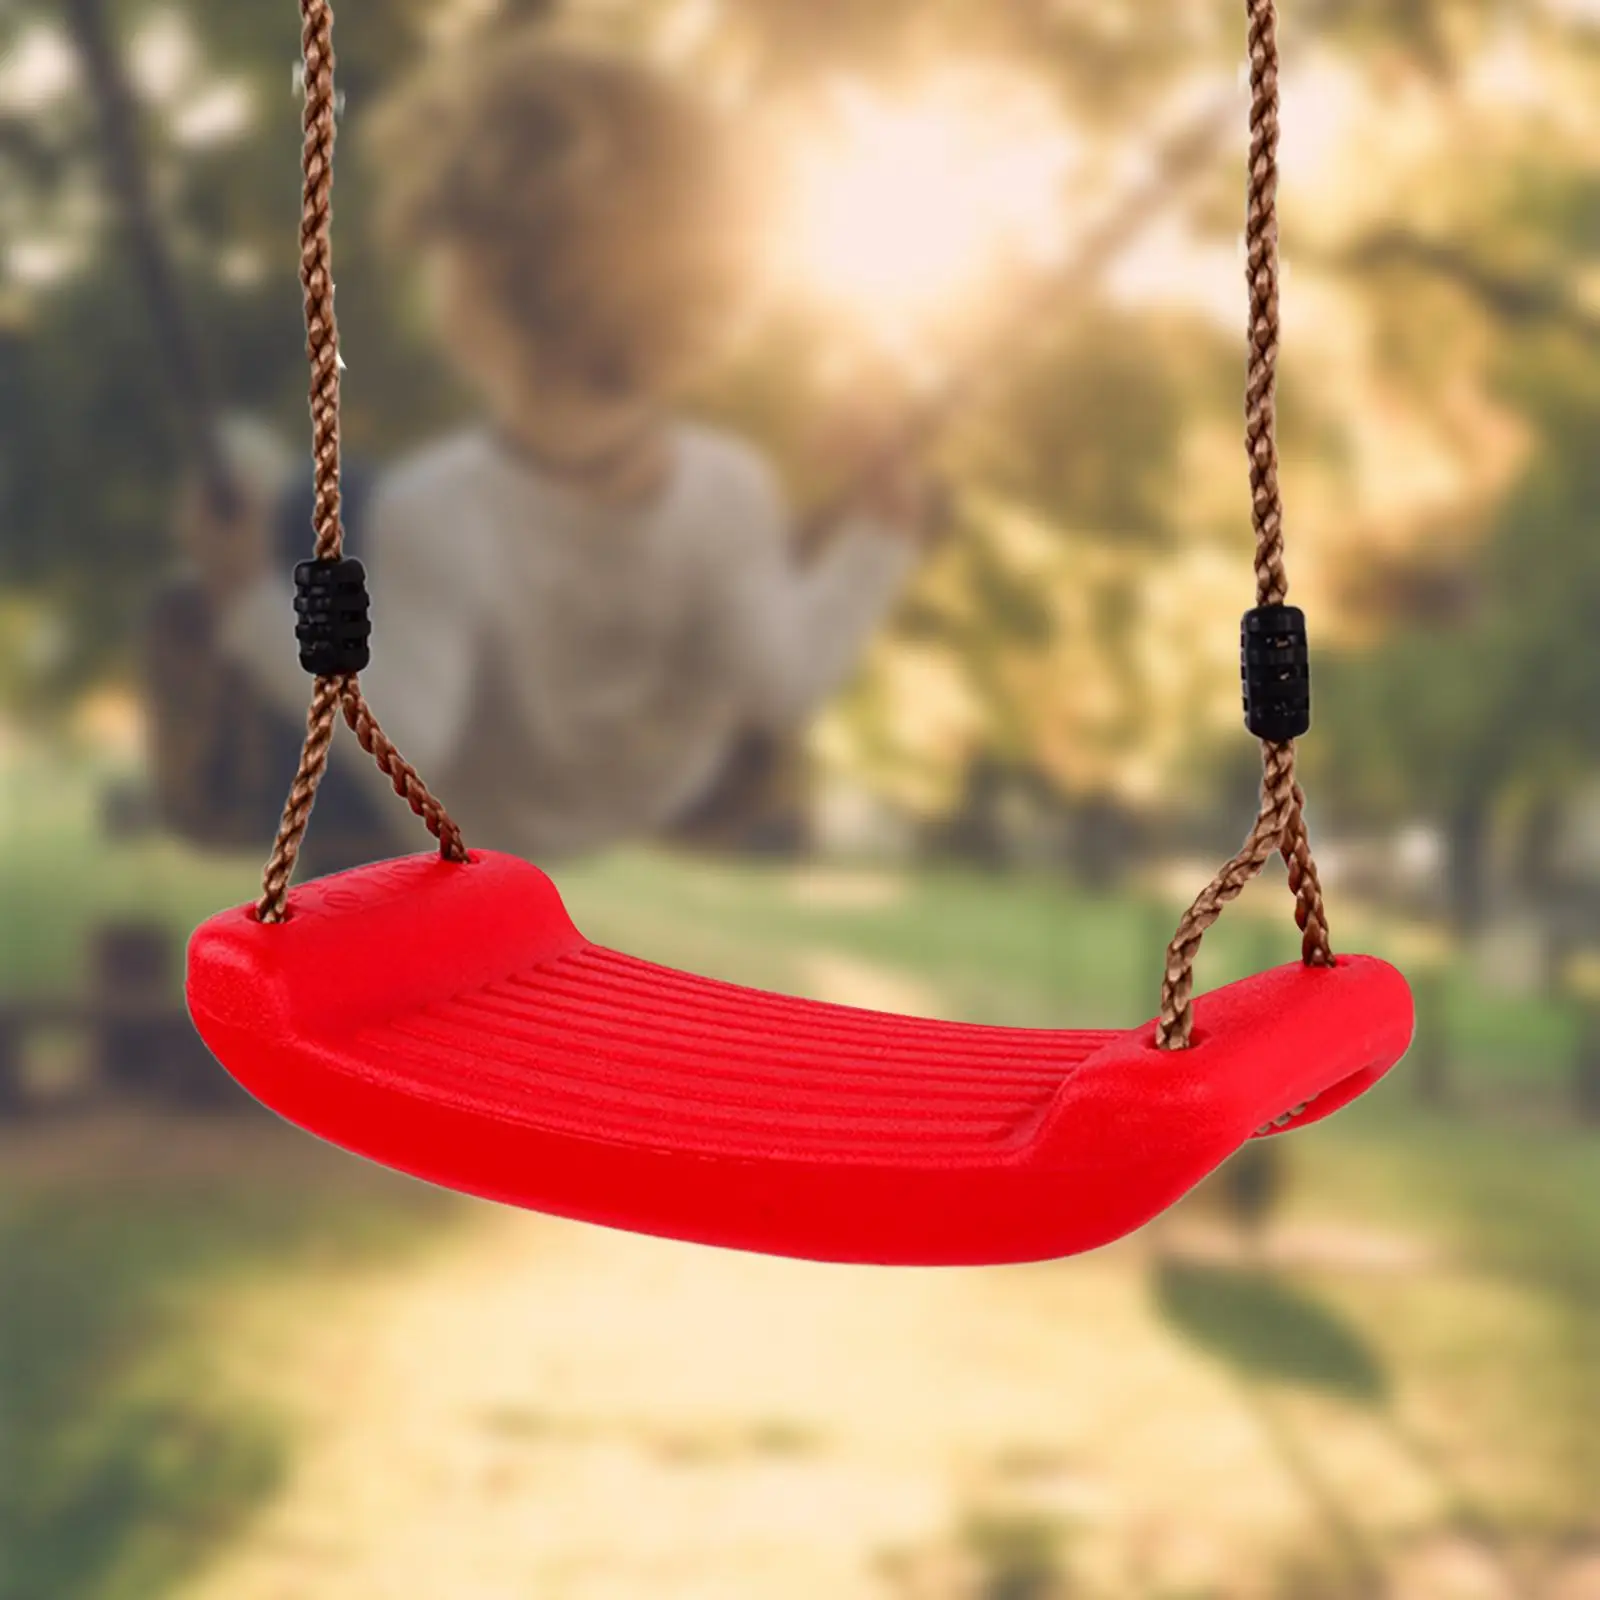 Hanging Seat Toys Flying Toy Garden Swing Kids with Height Adjustable Ropes Indoor Outdoor Toys Curved Board Kids Swing